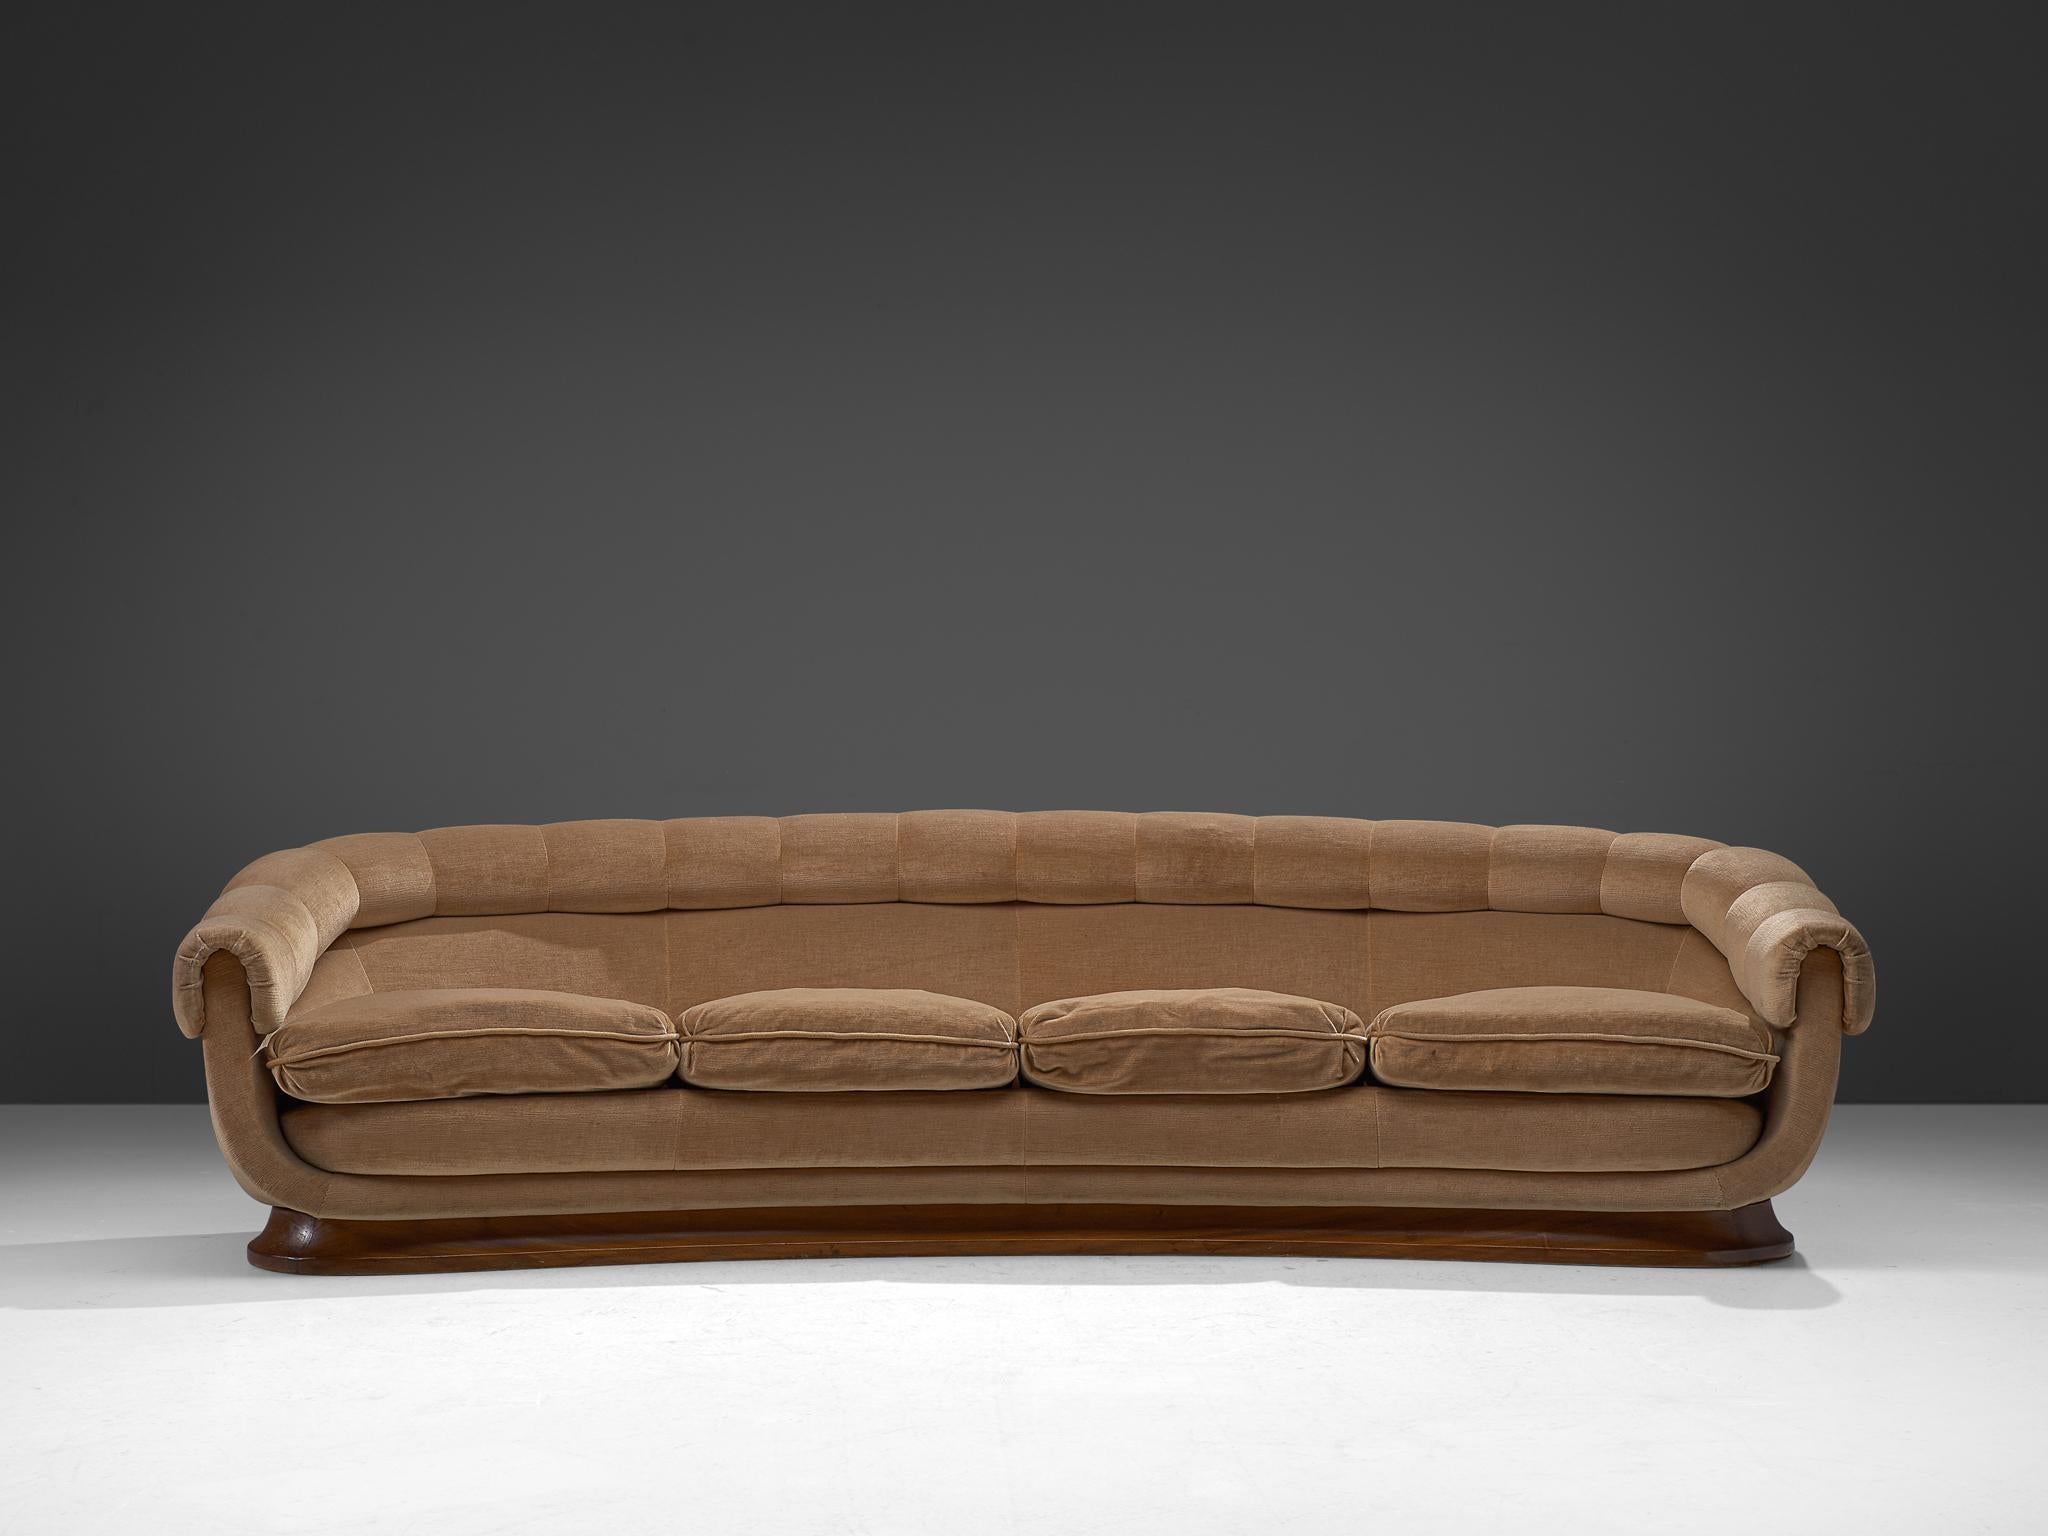 Italian four-seat sofa, fabric and wood, Italy, 1950s

An Italian voluptuous and bold sofa that shows a play of volumes with soft, fluid and rounded lines. The large sofa features a thick and rounded backrest that ascended flows over to the